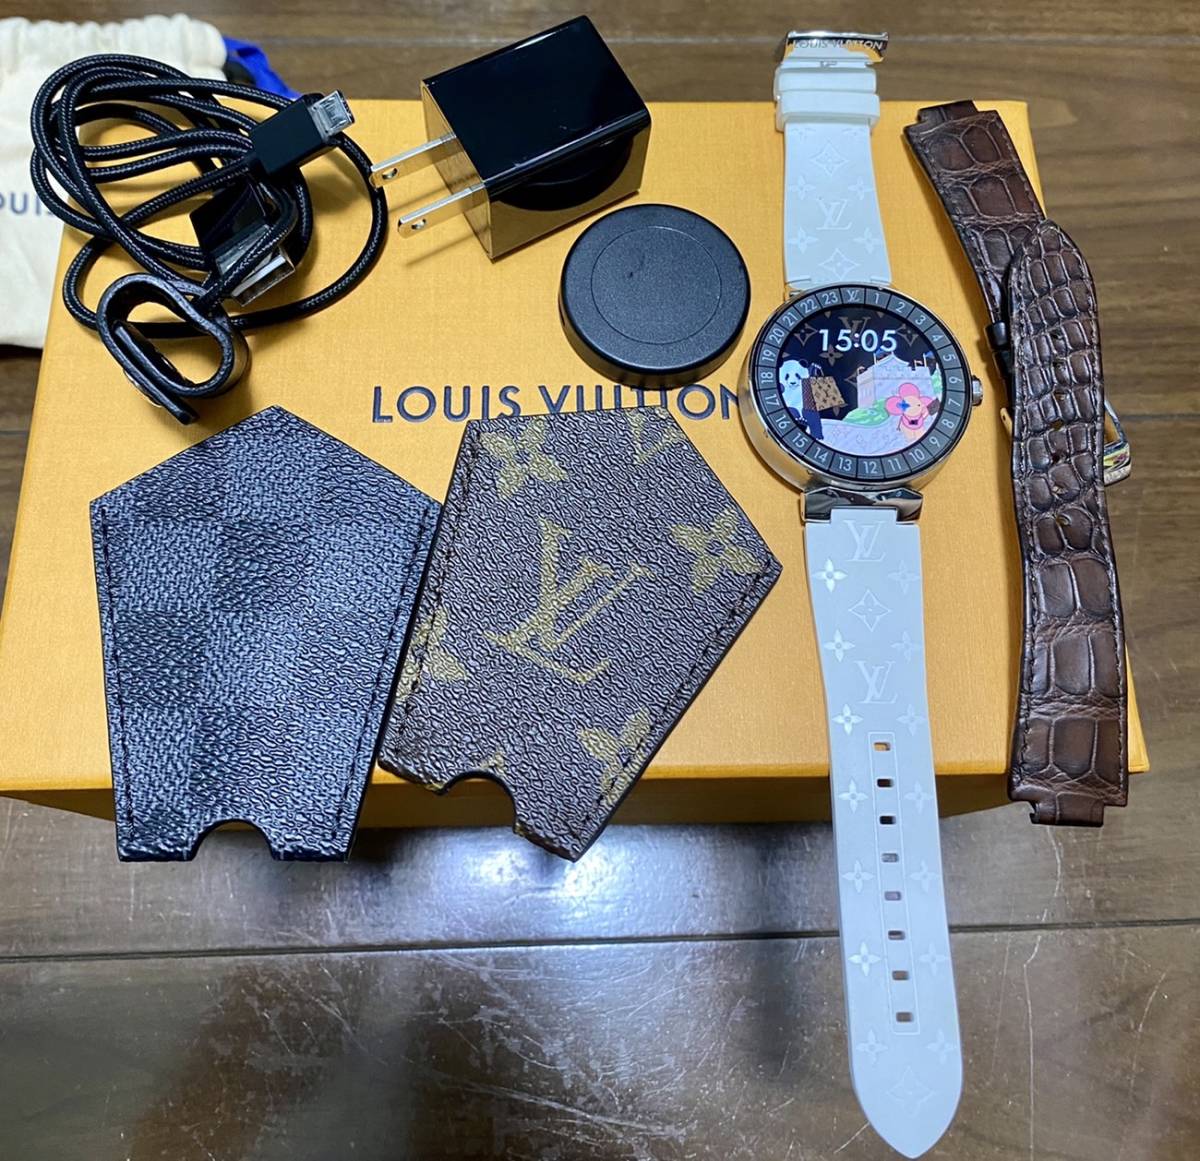 LOUIS VUITTON ルイヴィトン タンブール ホライゾン 初期型